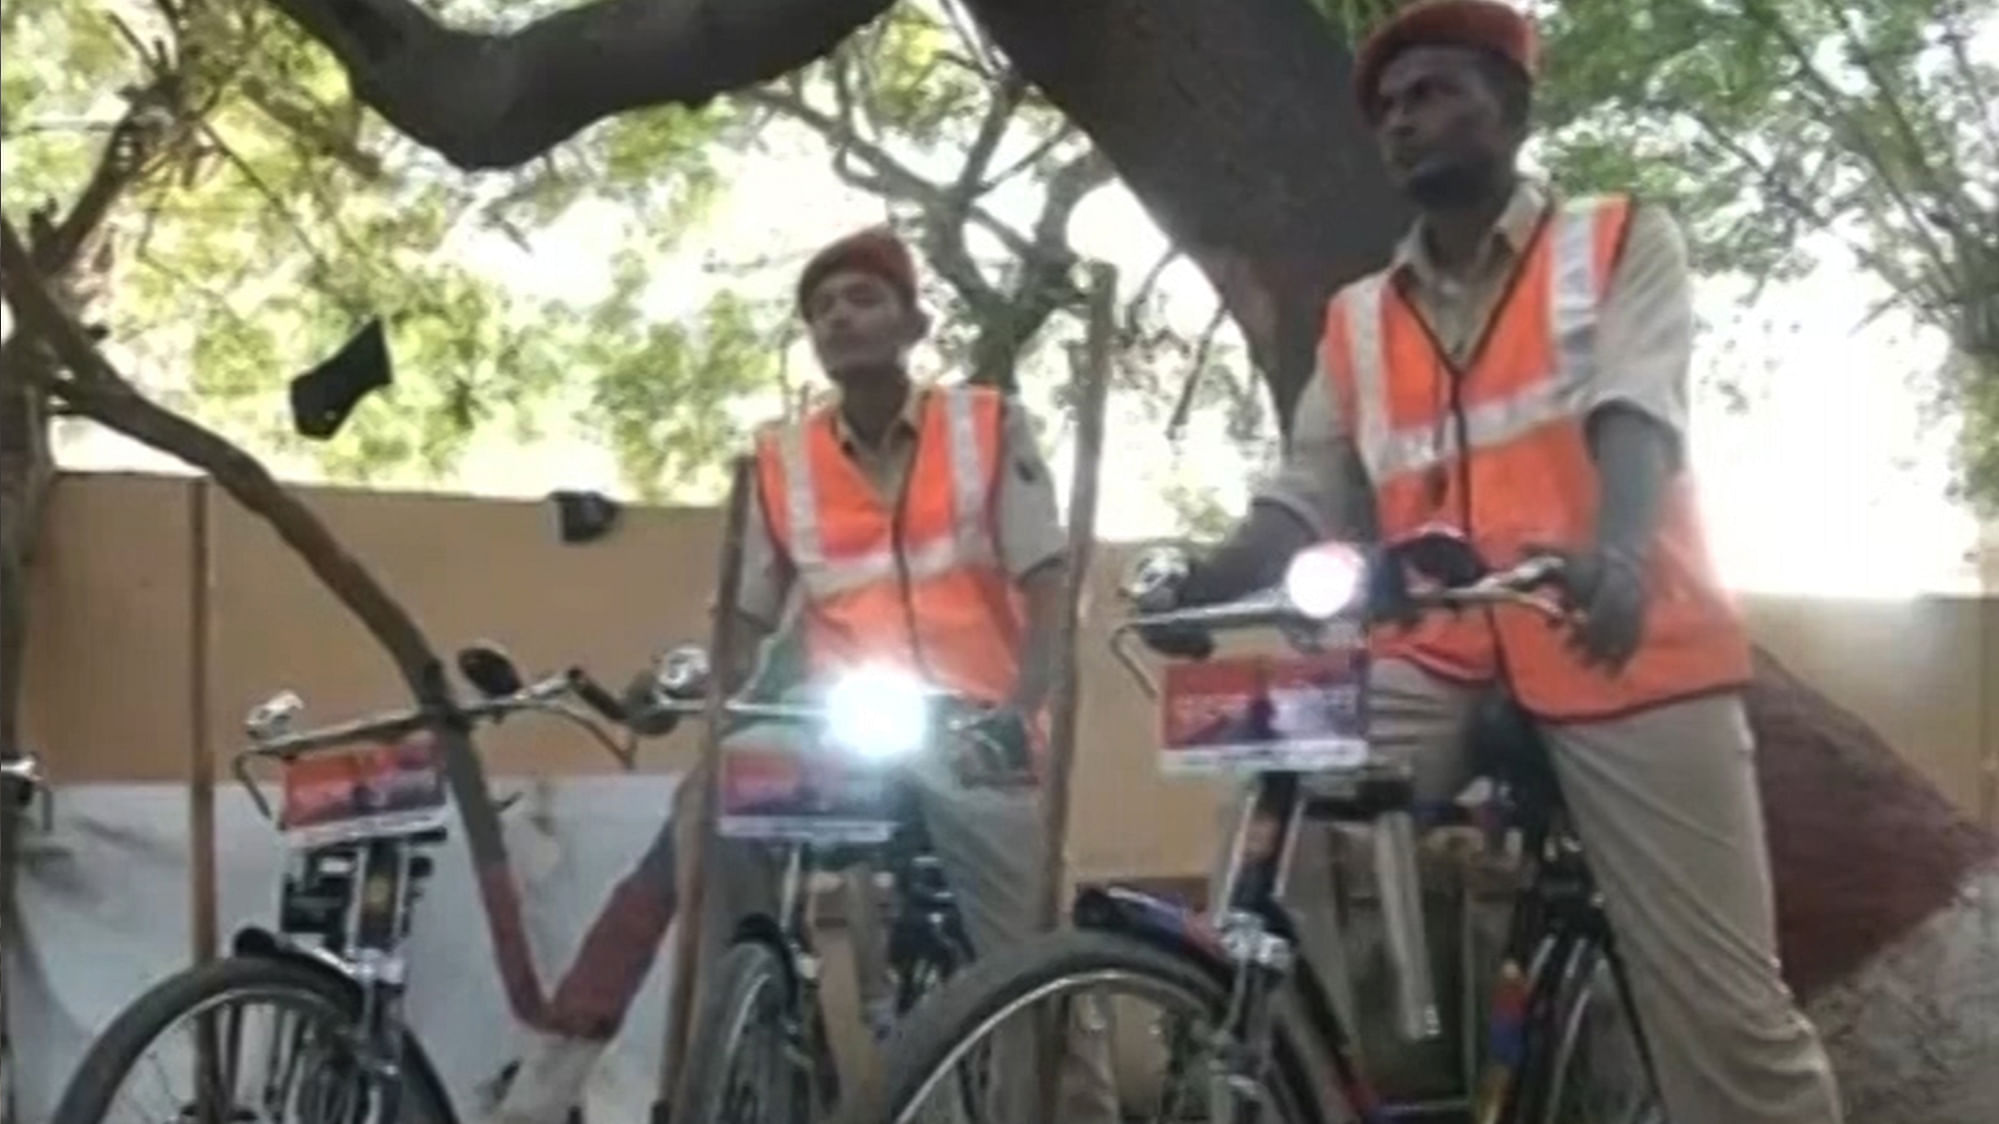 Police constables patrolling on bicycles as part of an experiment in Patna, Bihar. (Photo: ANI screengrab)